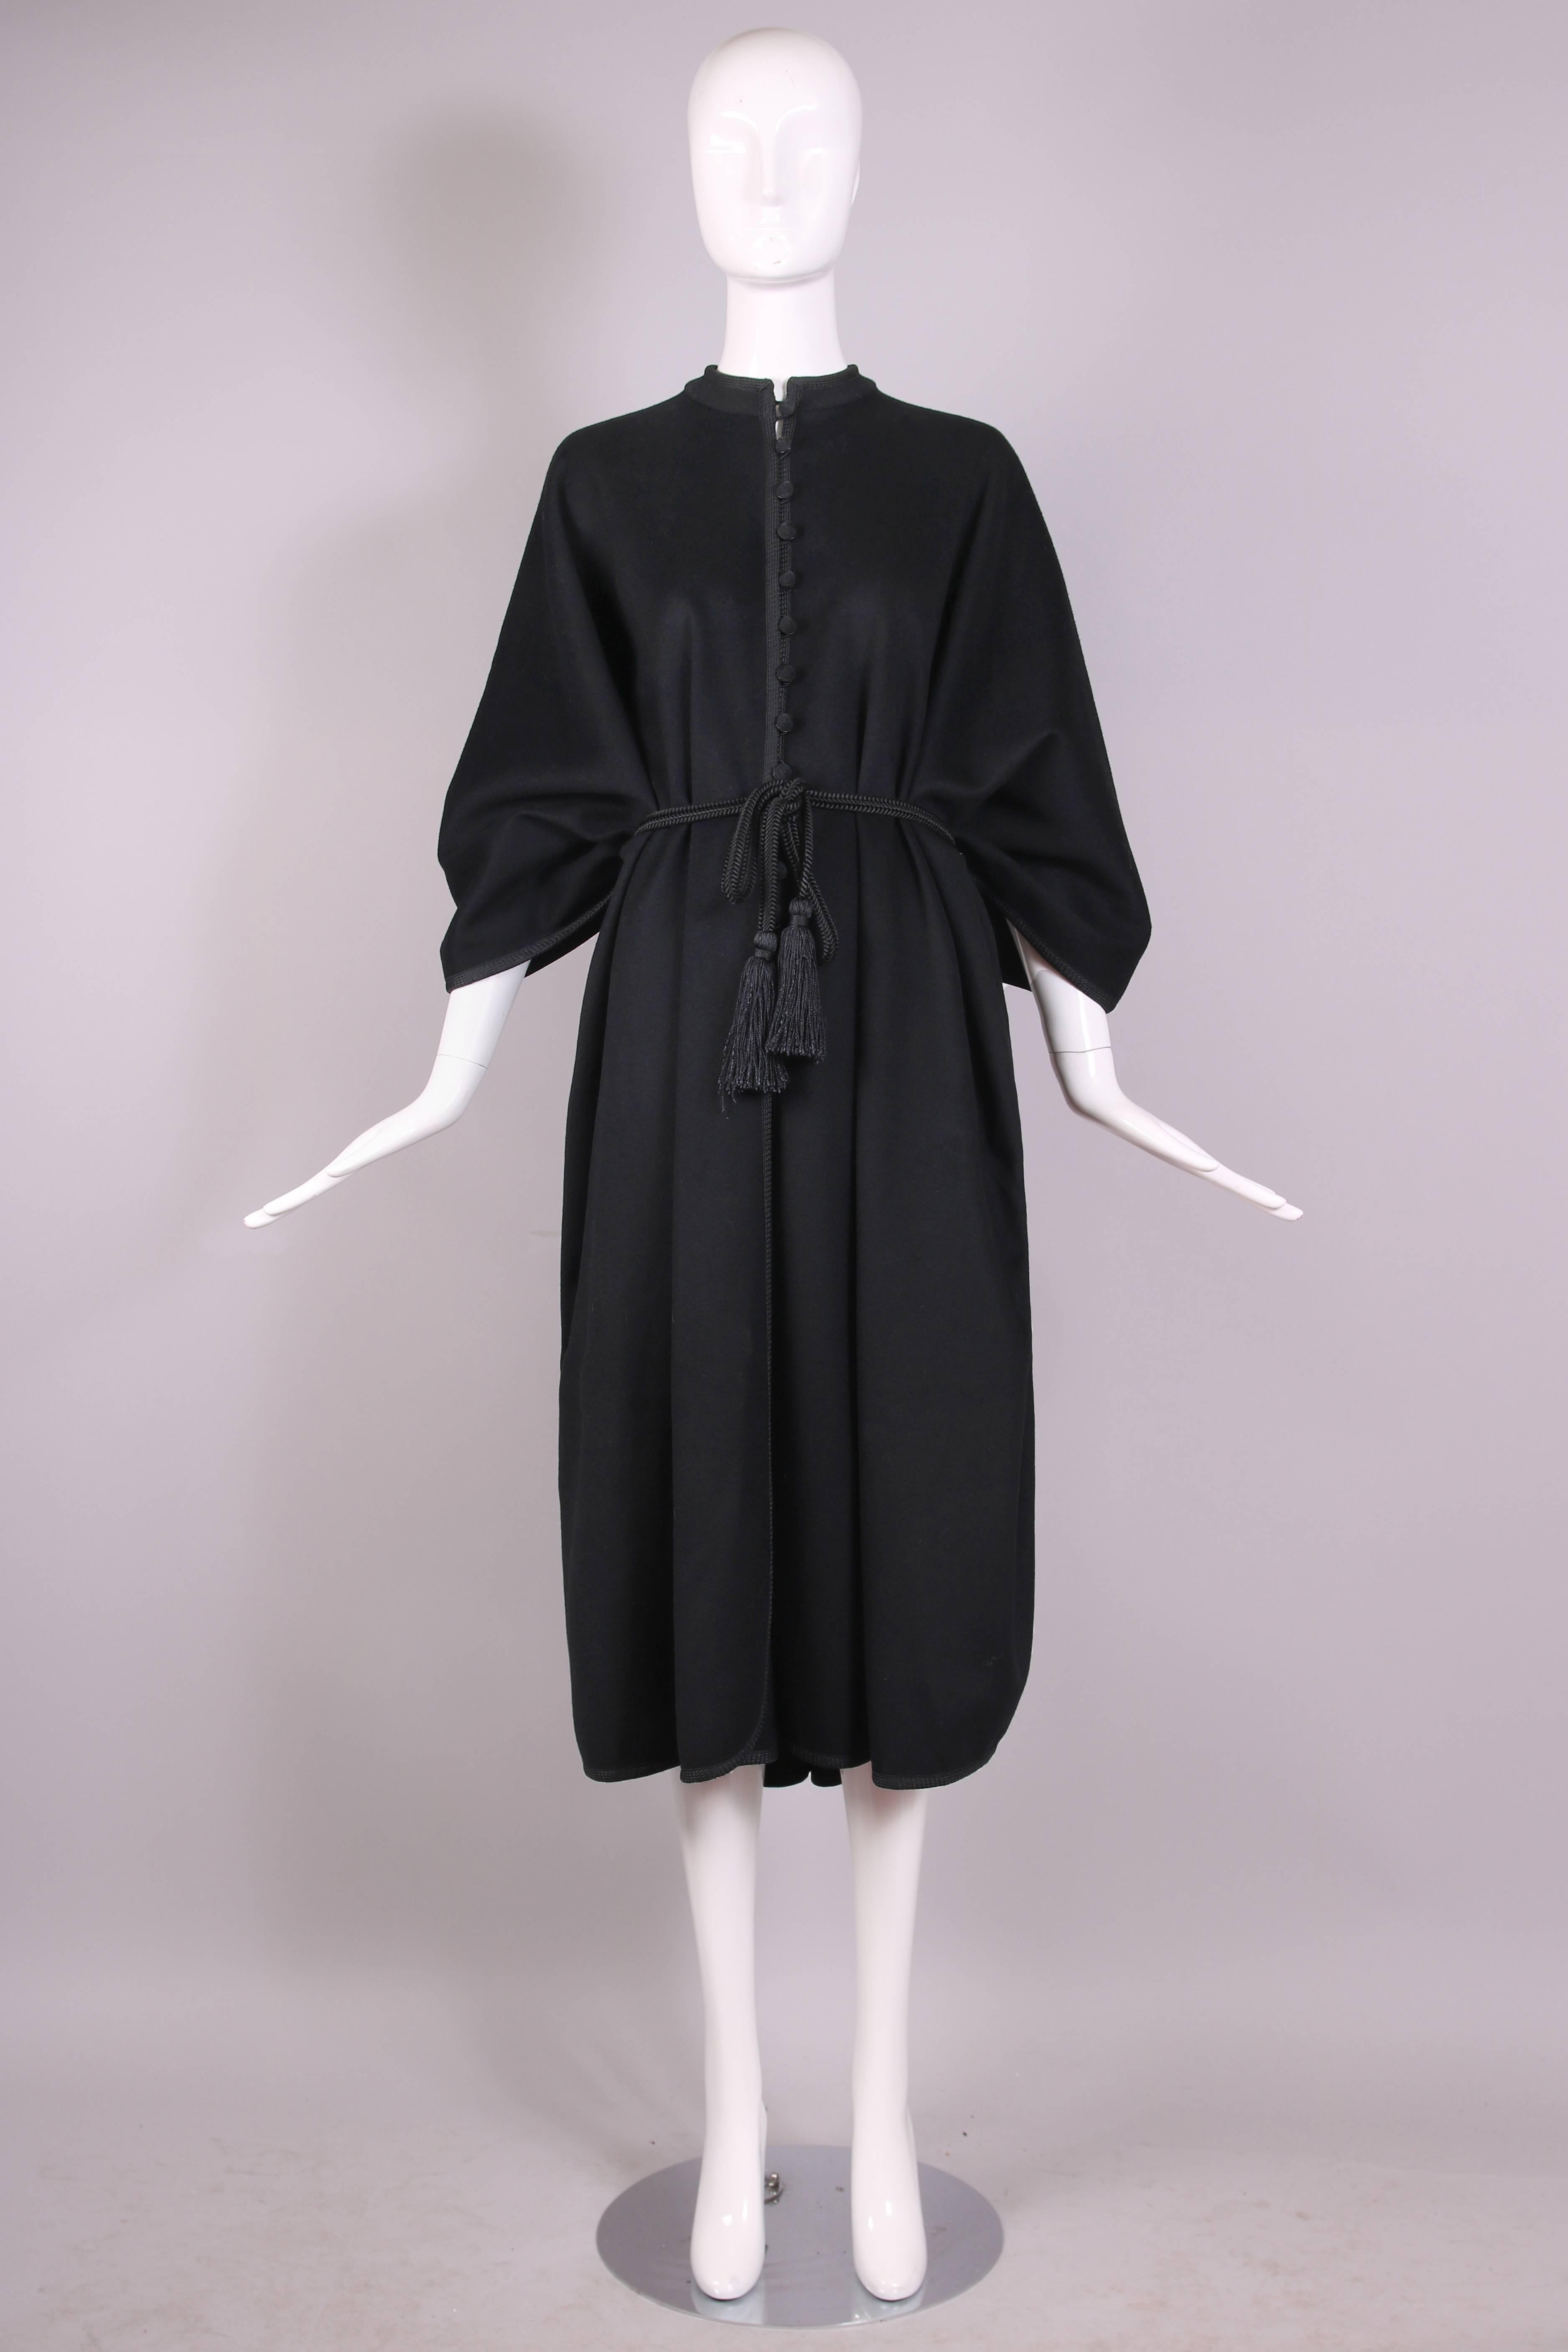 Ca. 1979 Yves Saint Laurent black wool cape w/wool braided trim and black domed spiral cord silk buttons. Cape comes with a braided silk cord that has silk tassels at either end and that wraps around the waist. In excellent condition. Size EU 40.